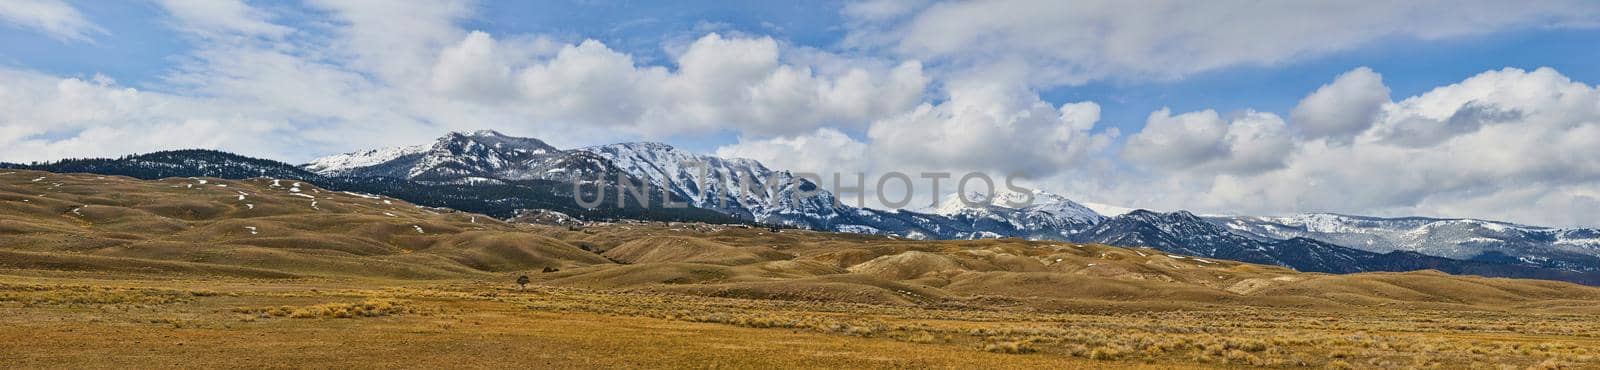 Image of Panorama of fields in west lined with snowy mountains